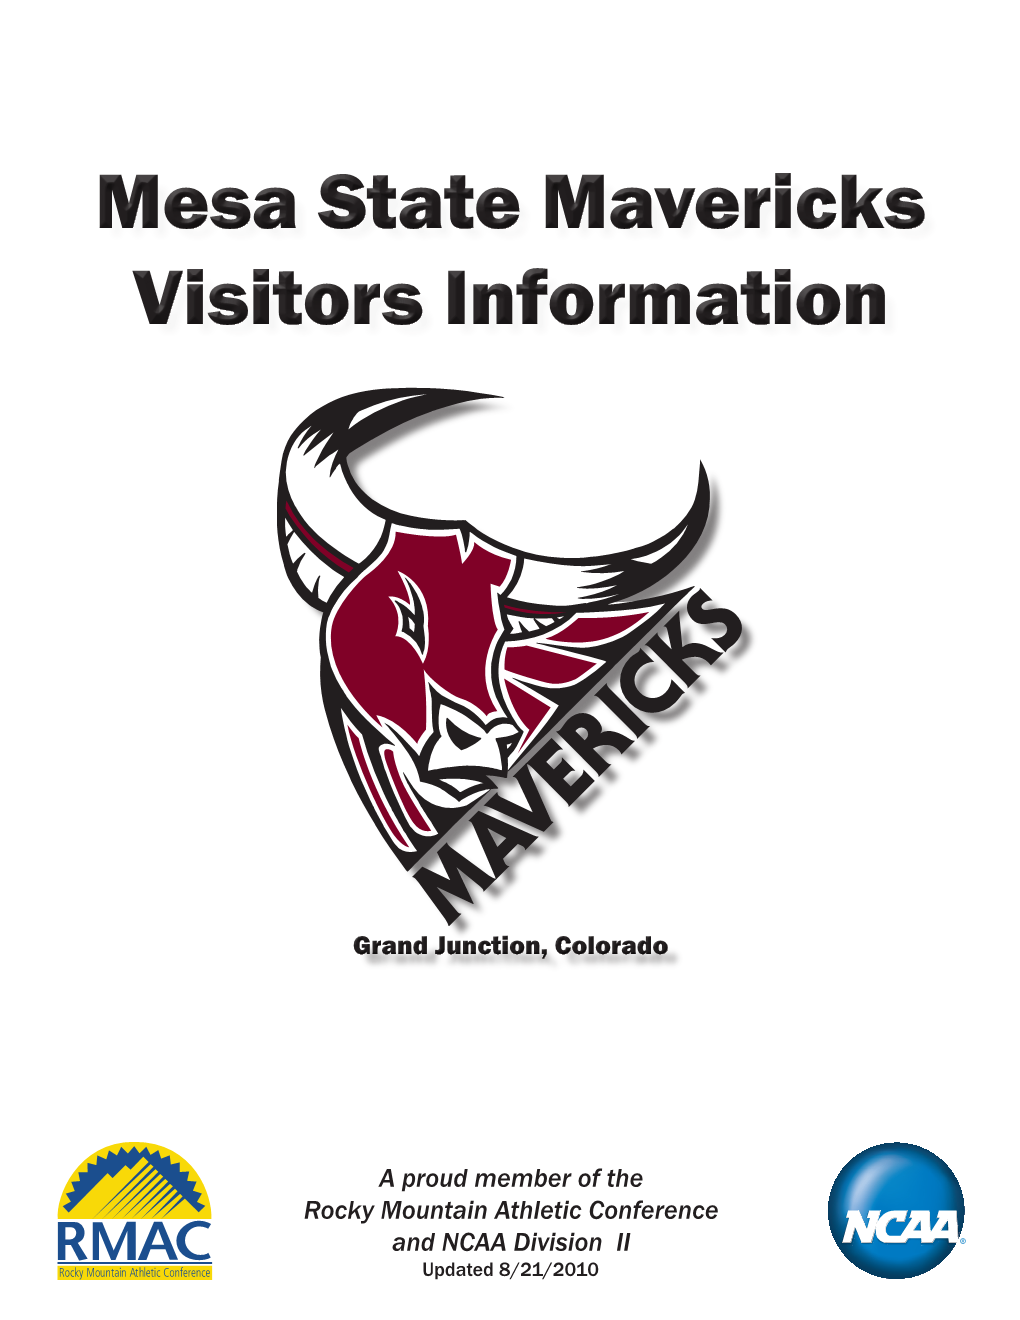 A Proud Member of the Rocky Mountain Athletic Conference and NCAA Division II Updated 8/21/2010 Visitors Information Table of Contents